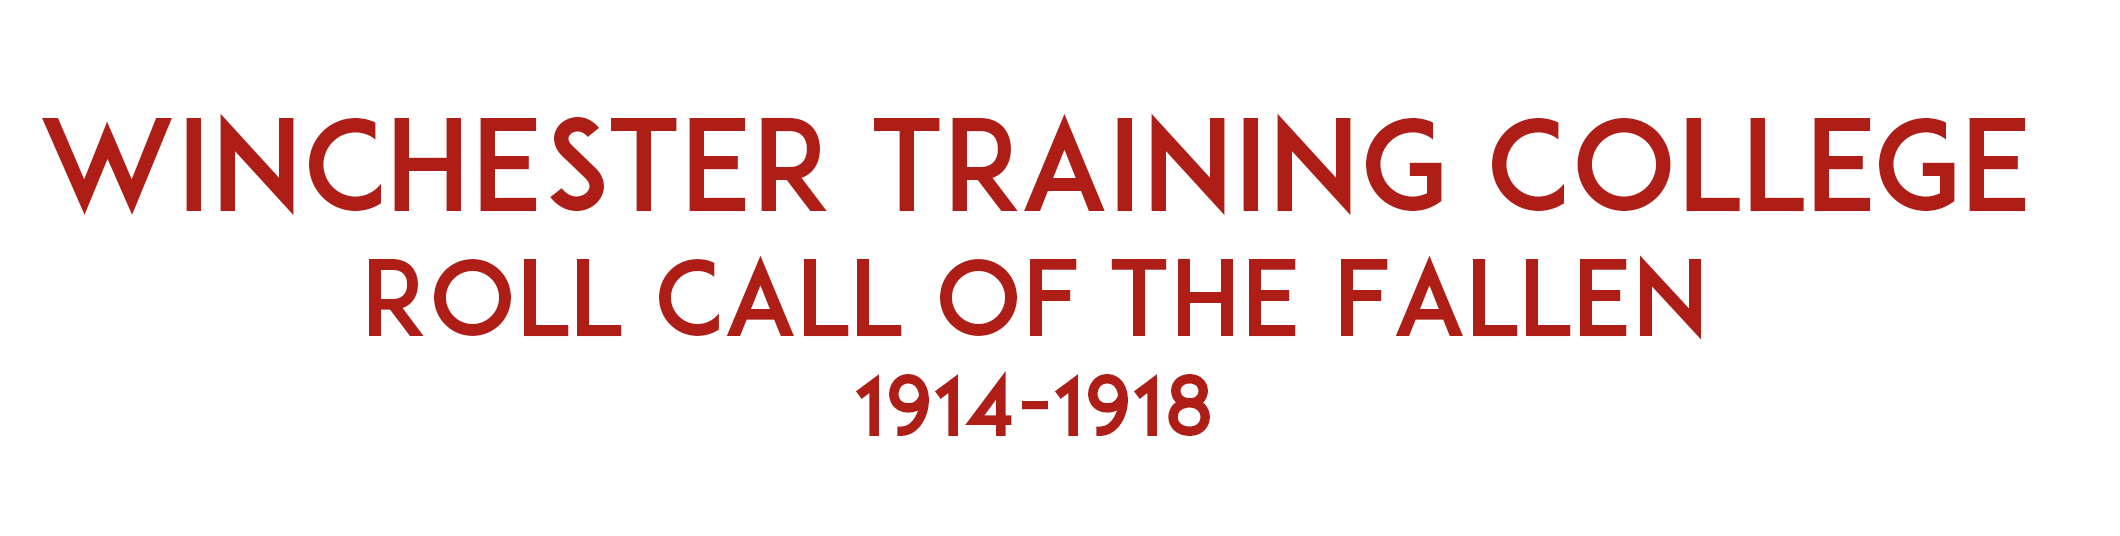 Winchester Training College Roll Call Of The Fallen 1914-1918